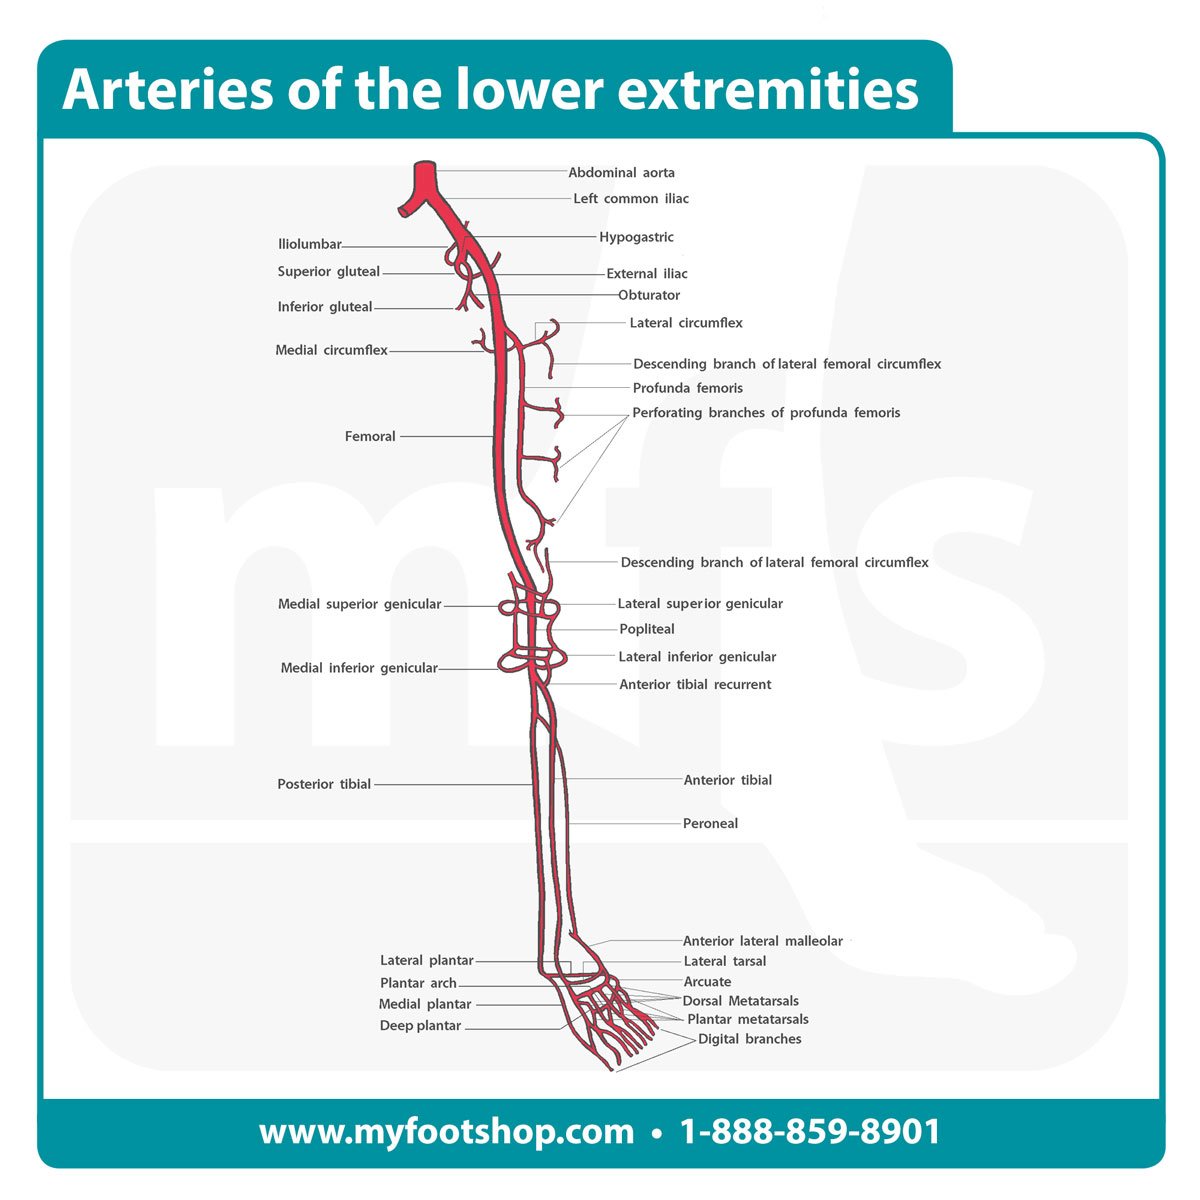 Image of the arteries of the lower extremities